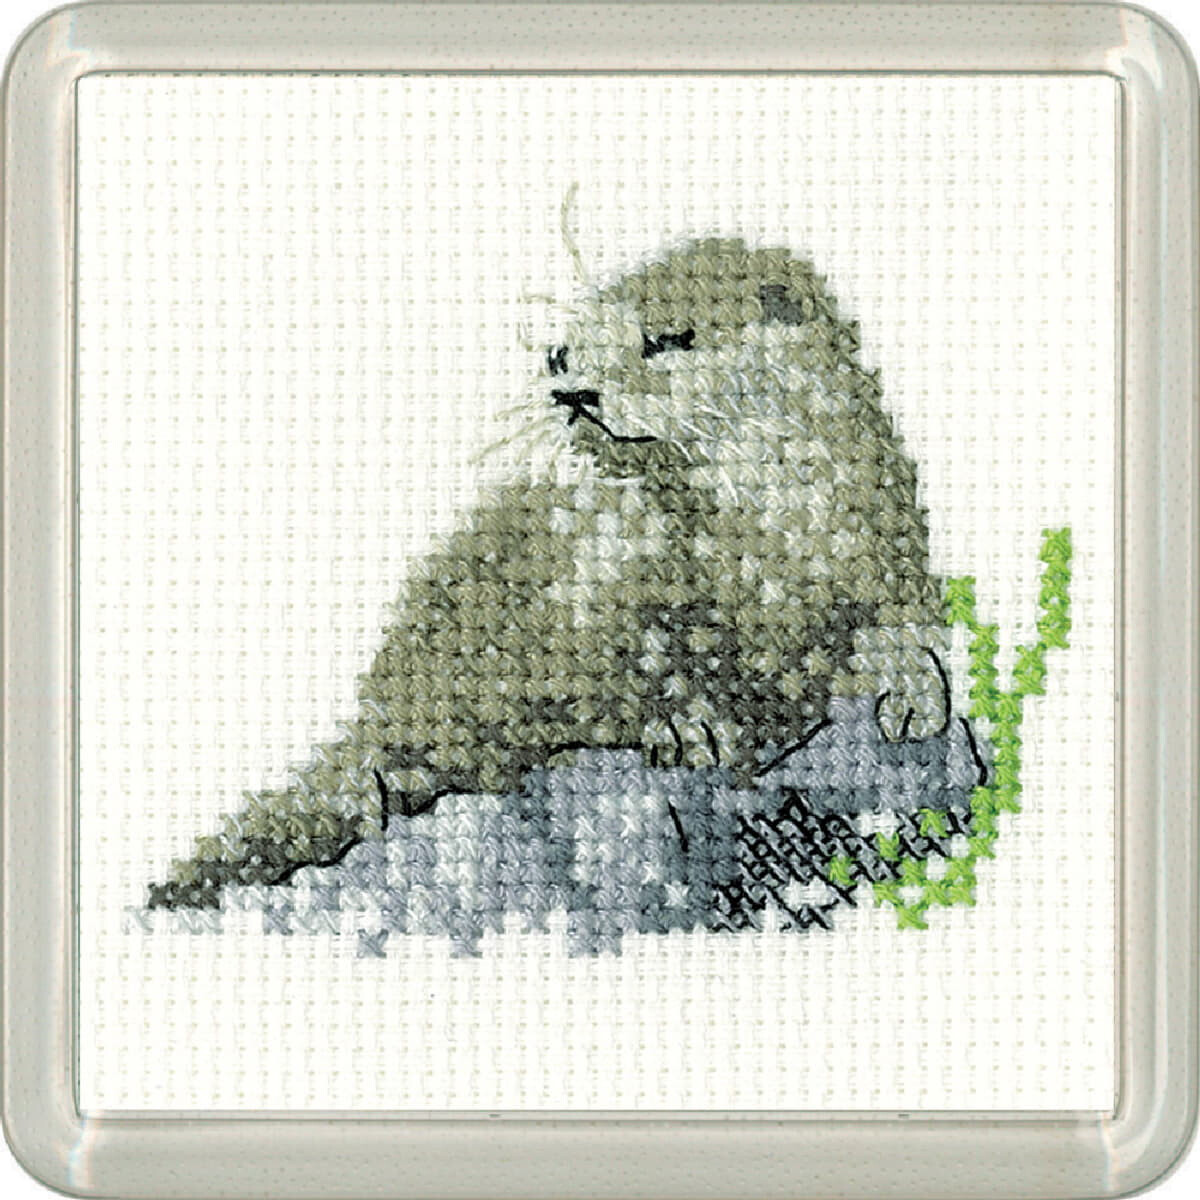 Heritage counted cross stitch kit with Coaster, Aida...